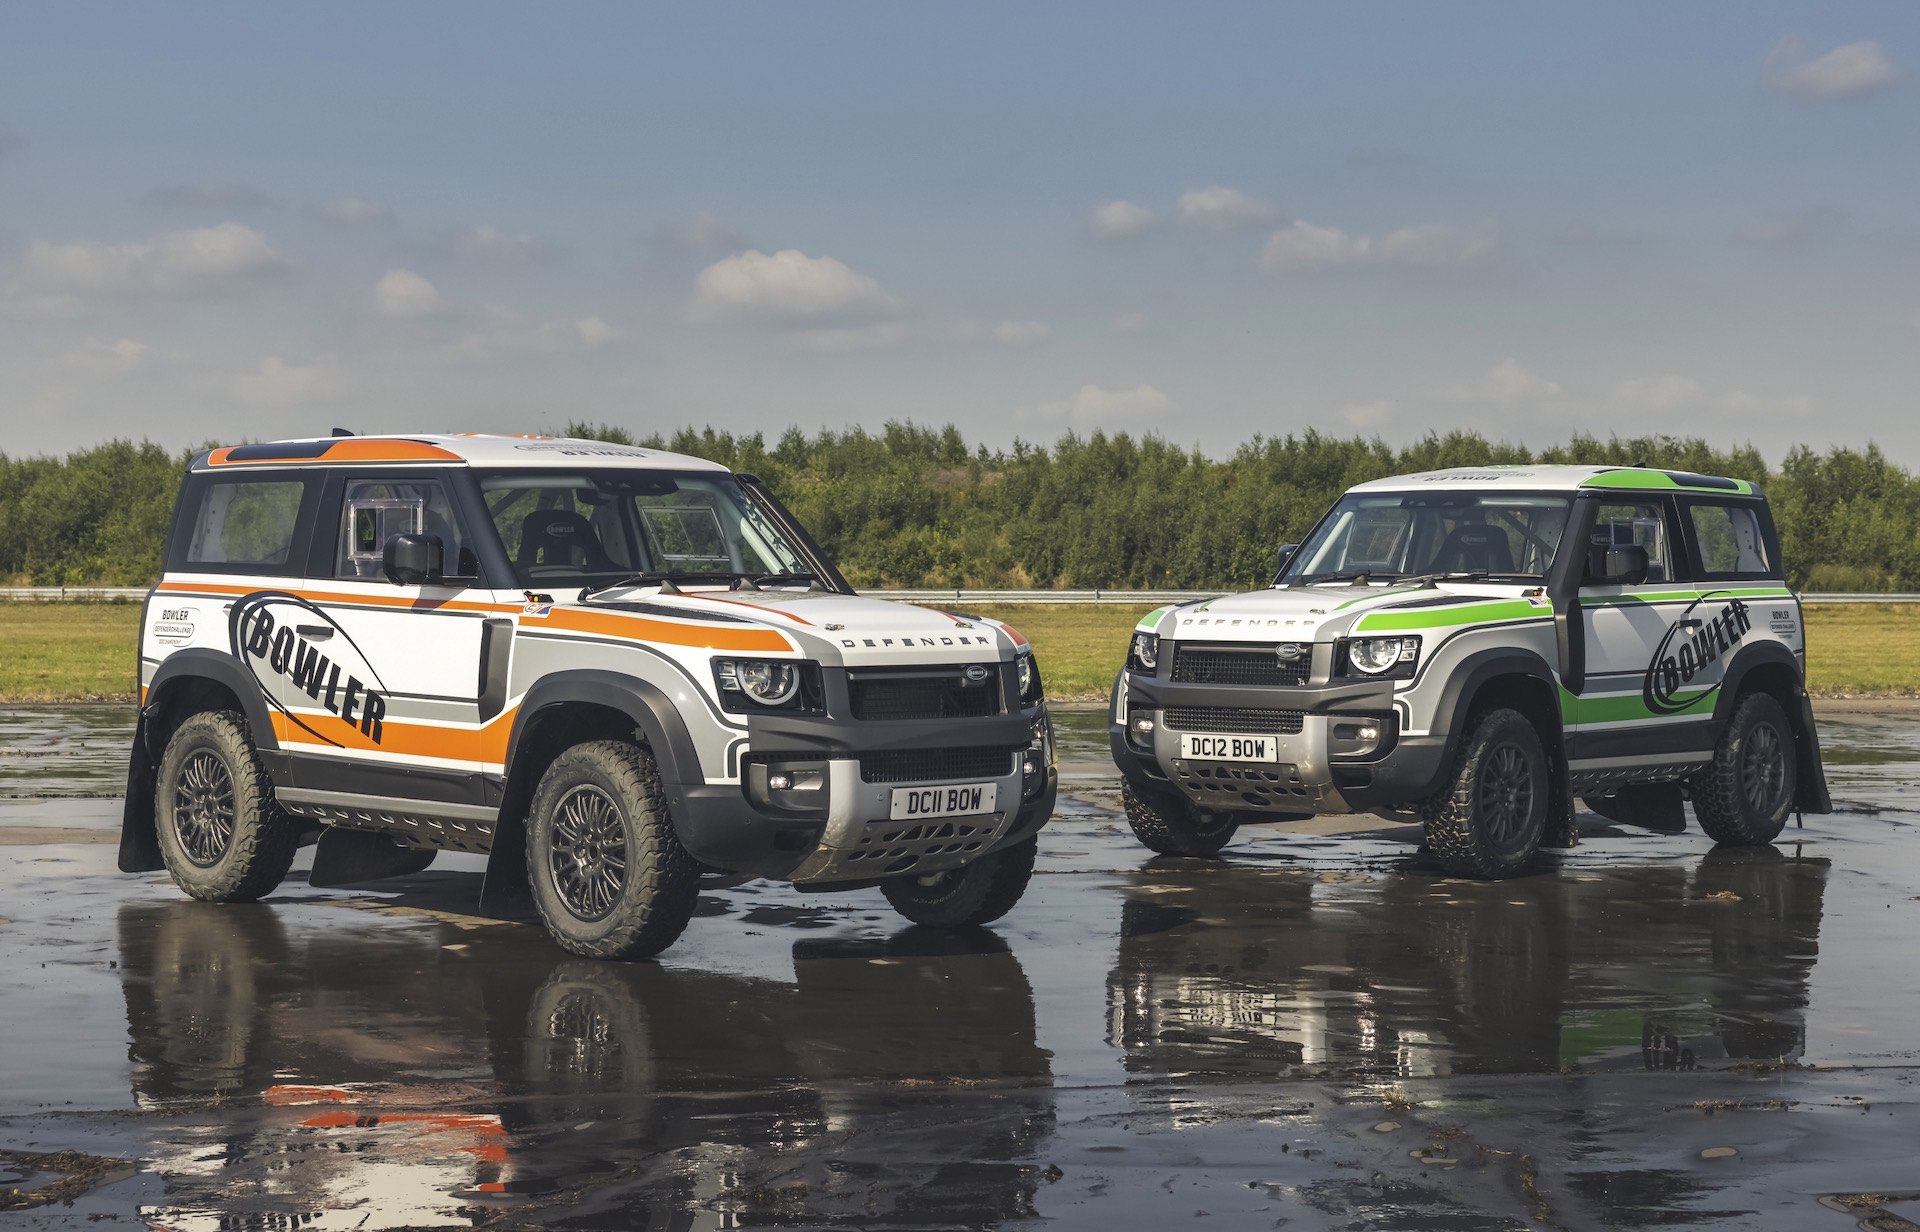 2022 Bowler Defender Challenge one-make race series announced